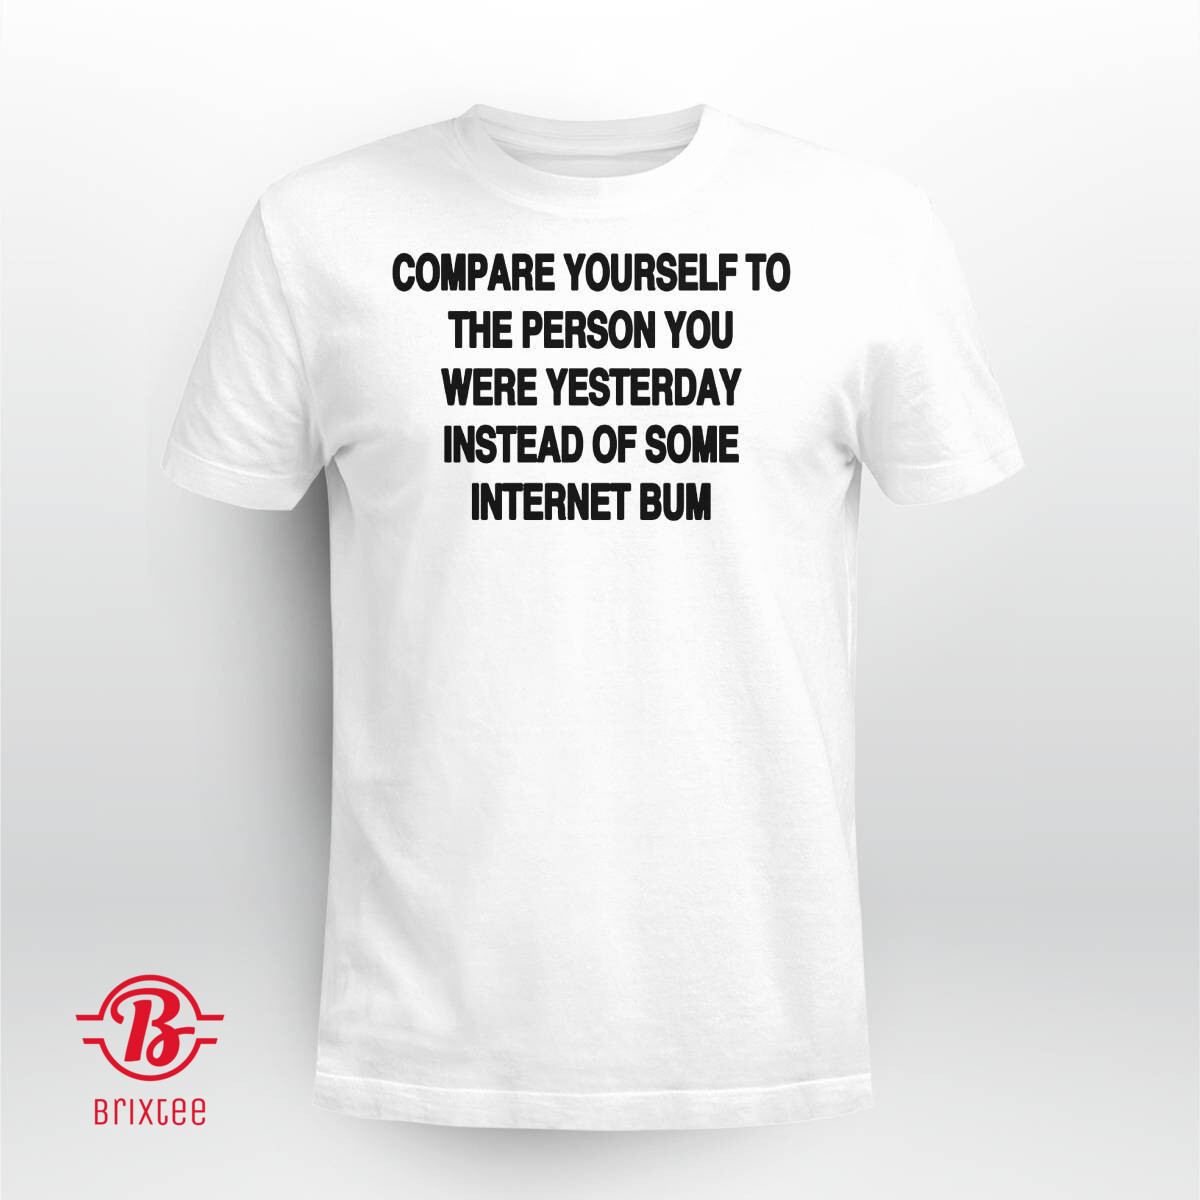 Compare Yourself To The Person You Were Yesterday Instead Of Some Internet Bum